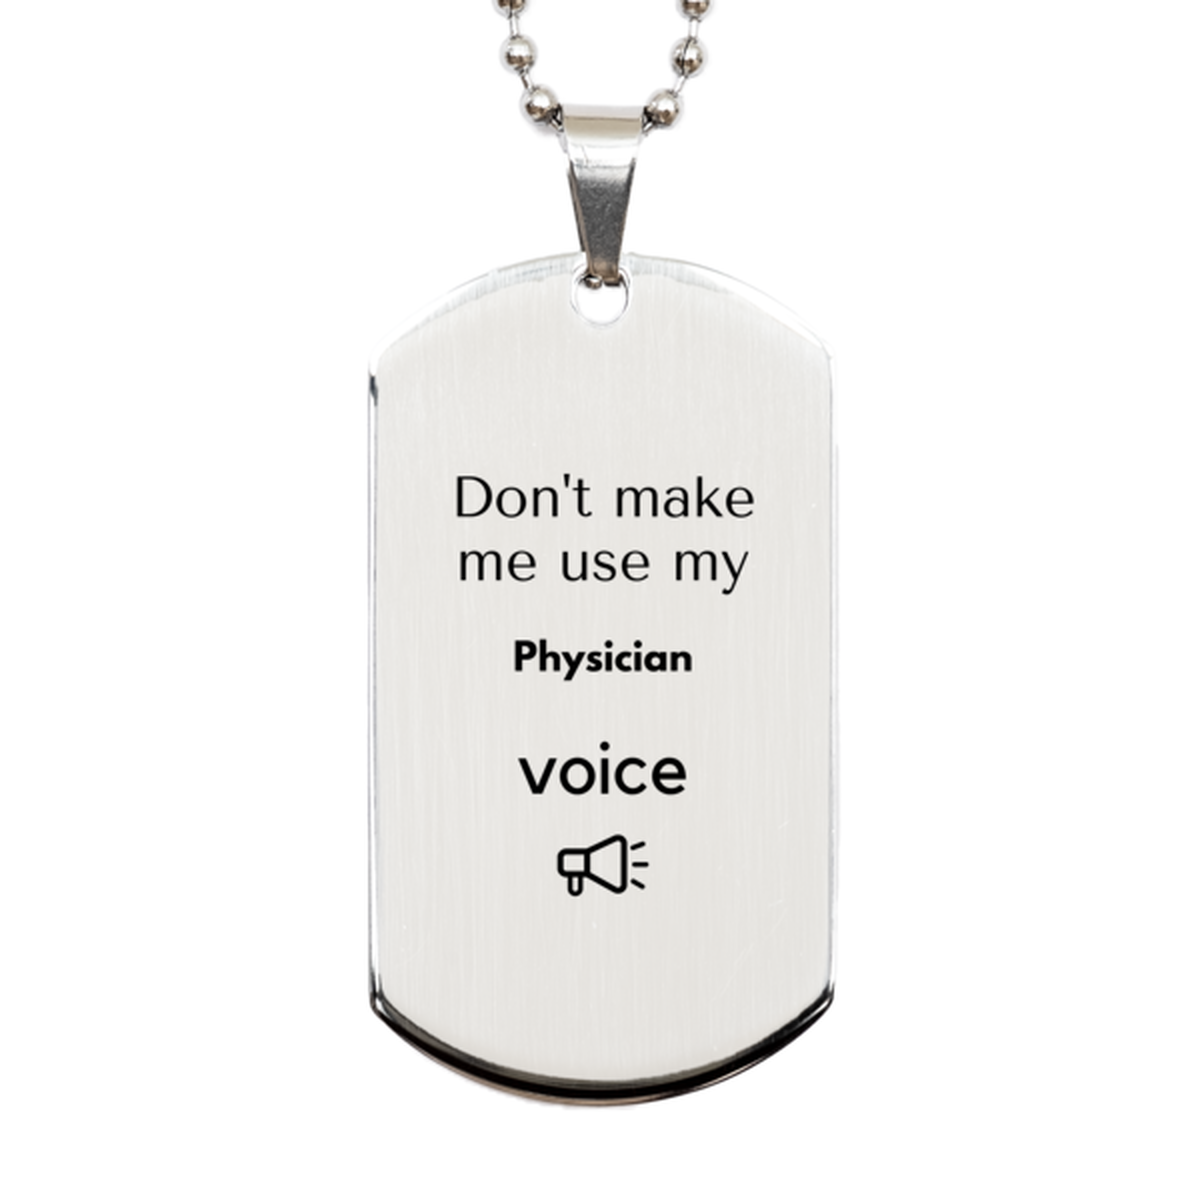 Don't make me use my Physician voice, Sarcasm Physician Gifts, Christmas Physician Silver Dog Tag Birthday Unique Gifts For Physician Coworkers, Men, Women, Colleague, Friends